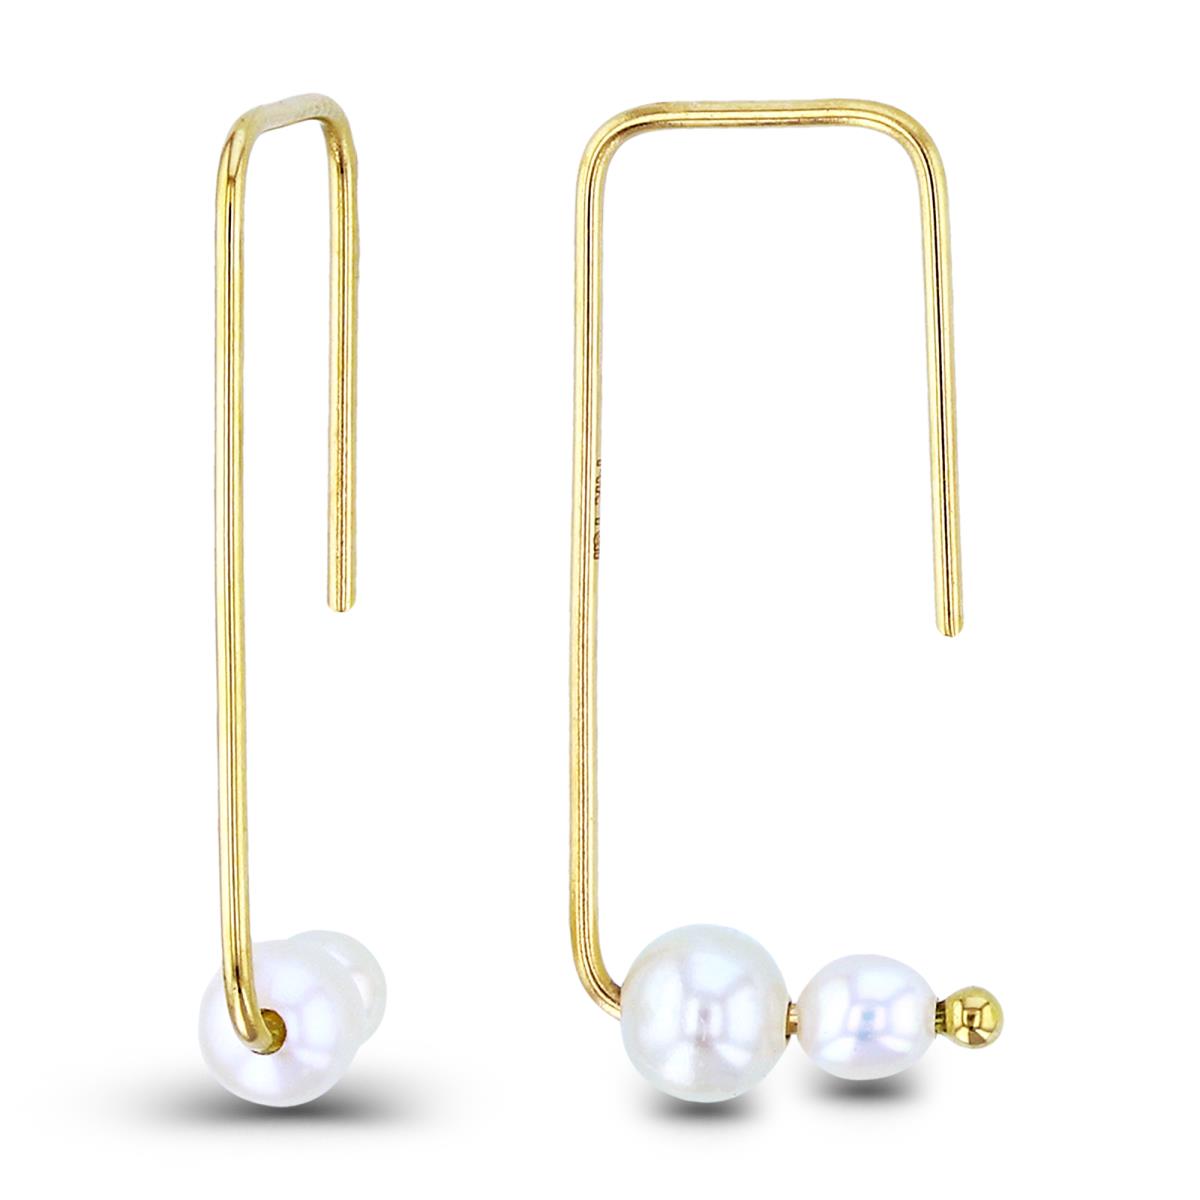 10K Yellow Gold 4mm/3mm Rnd Full Drill Water Fresh Pearls Wired Hook Earrings